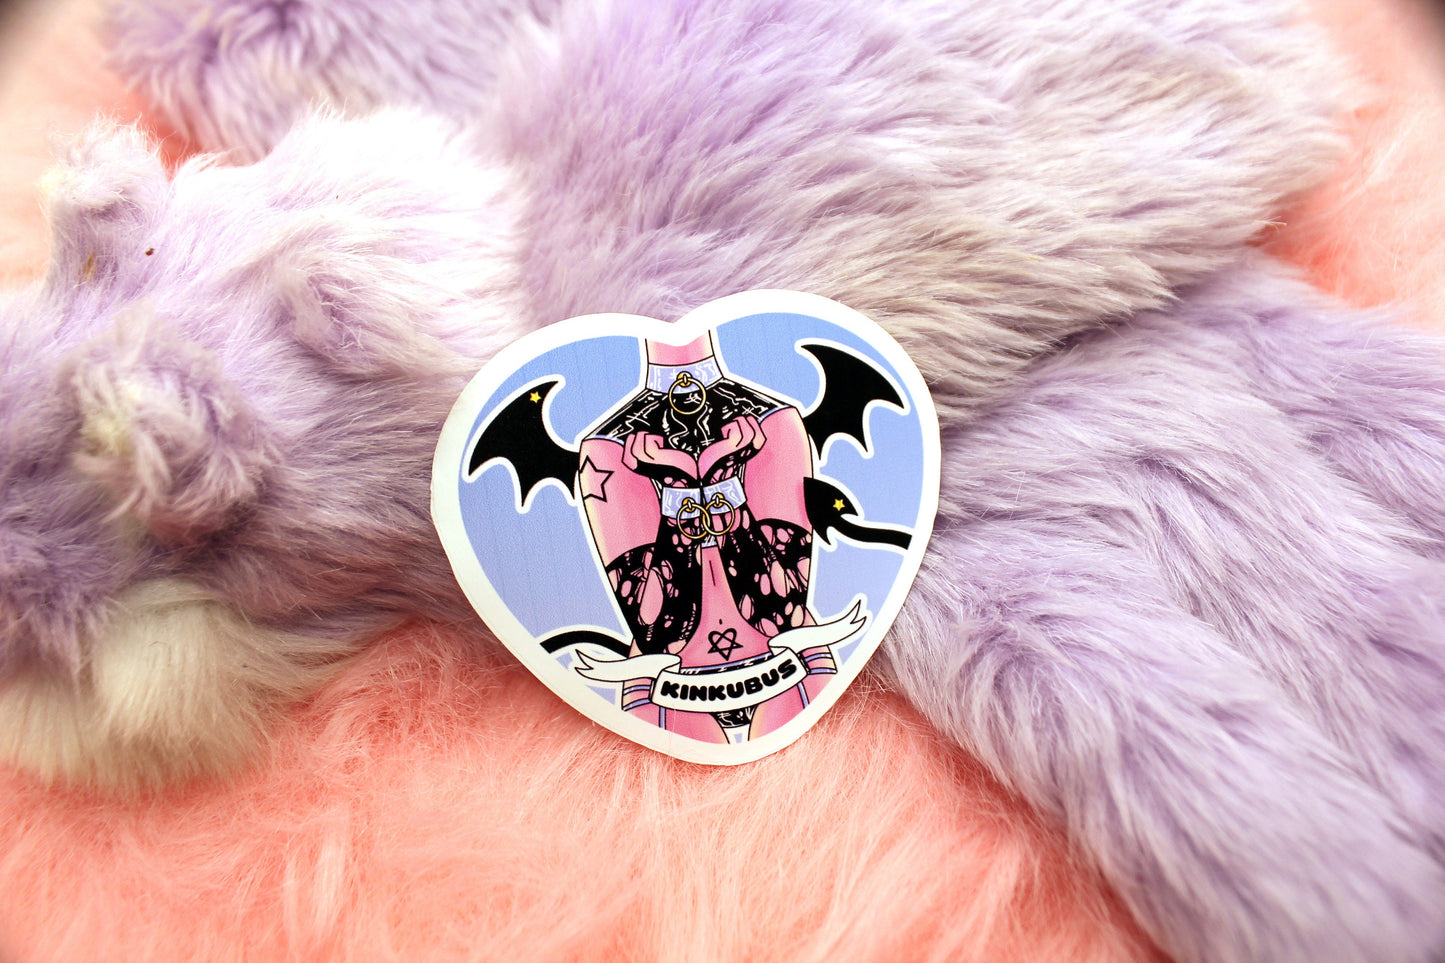 Kinkubus Concubus Heart Sticker (55mm) - Androgynous demon stickers